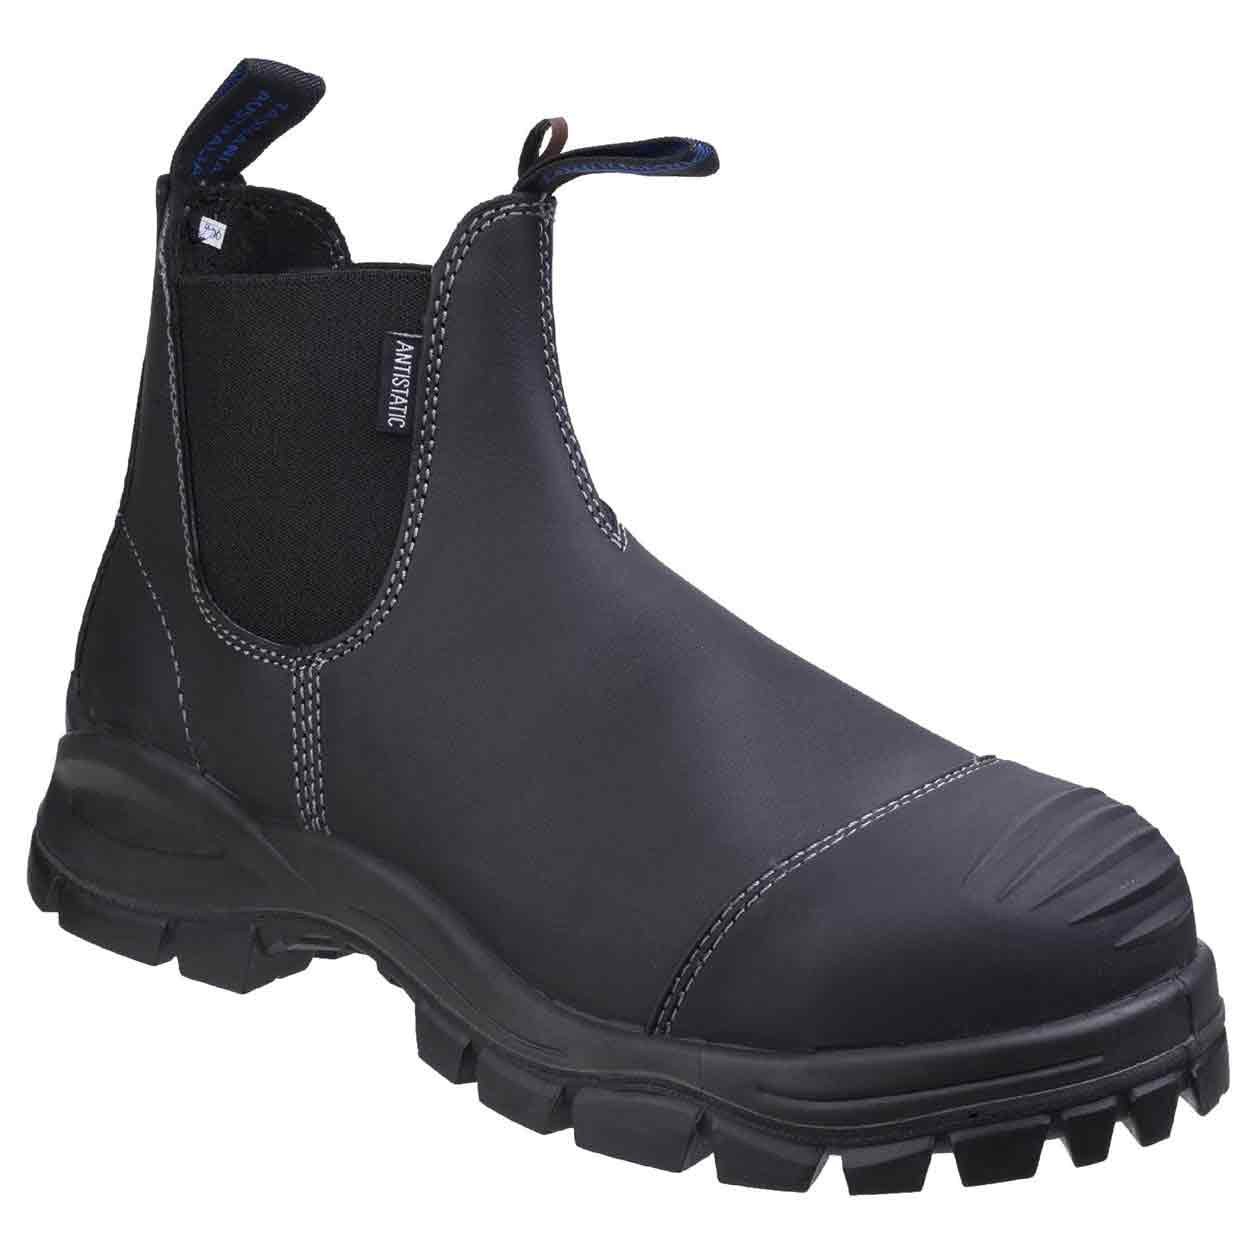 blundstone 192 safety boots